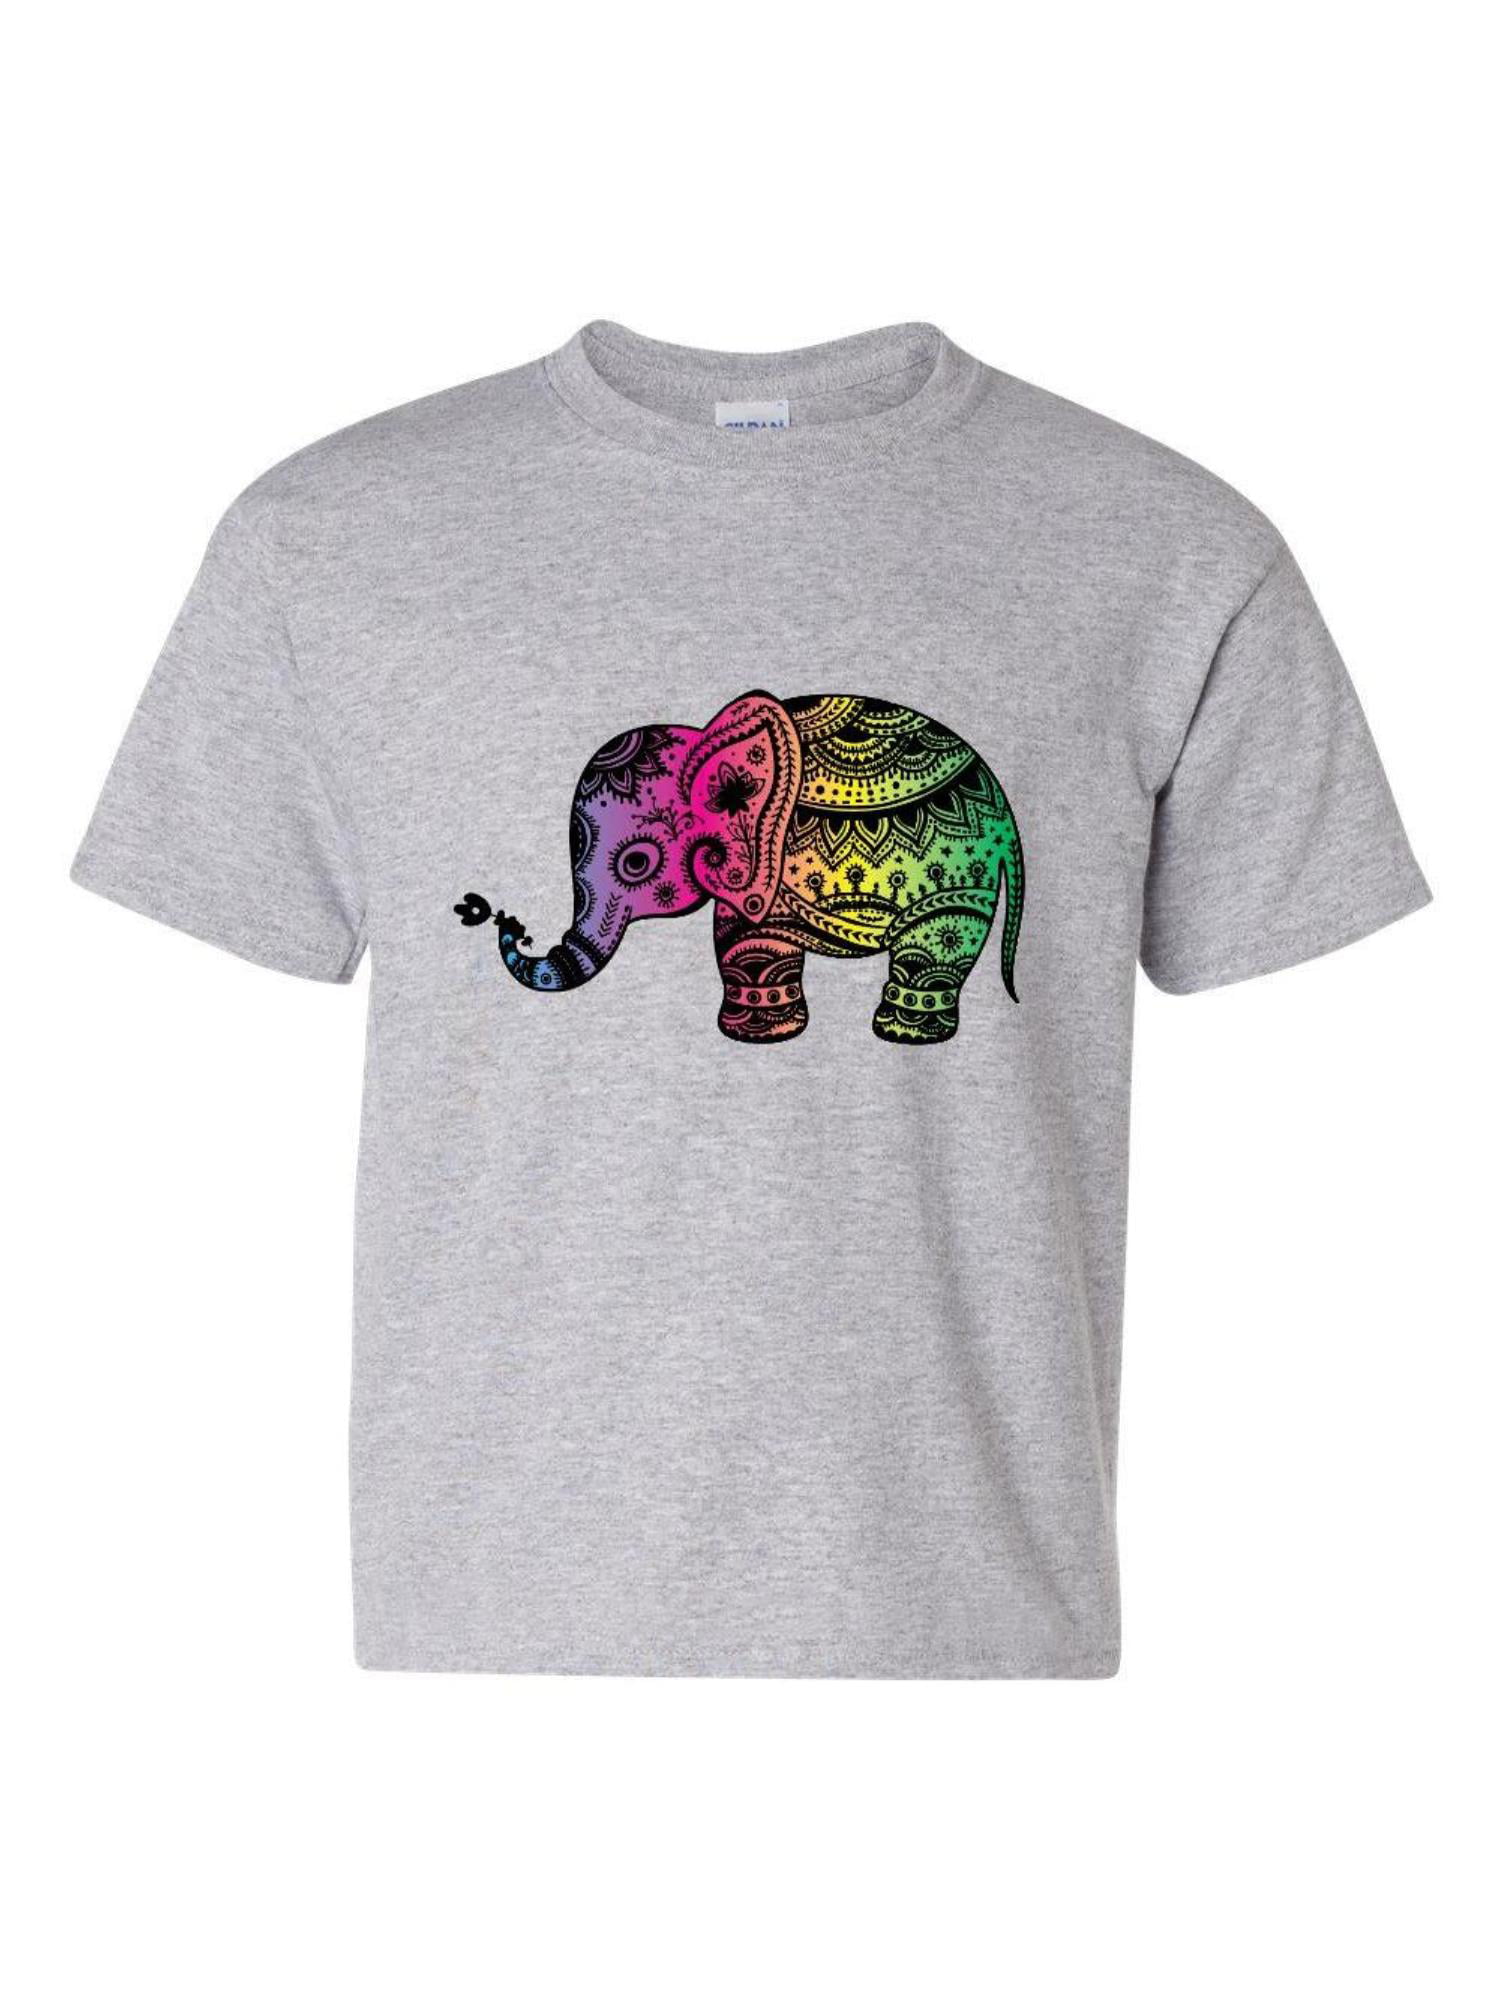 IWPF - Youth Elephant T-Shirt For Girls and Boys - Walmart ...